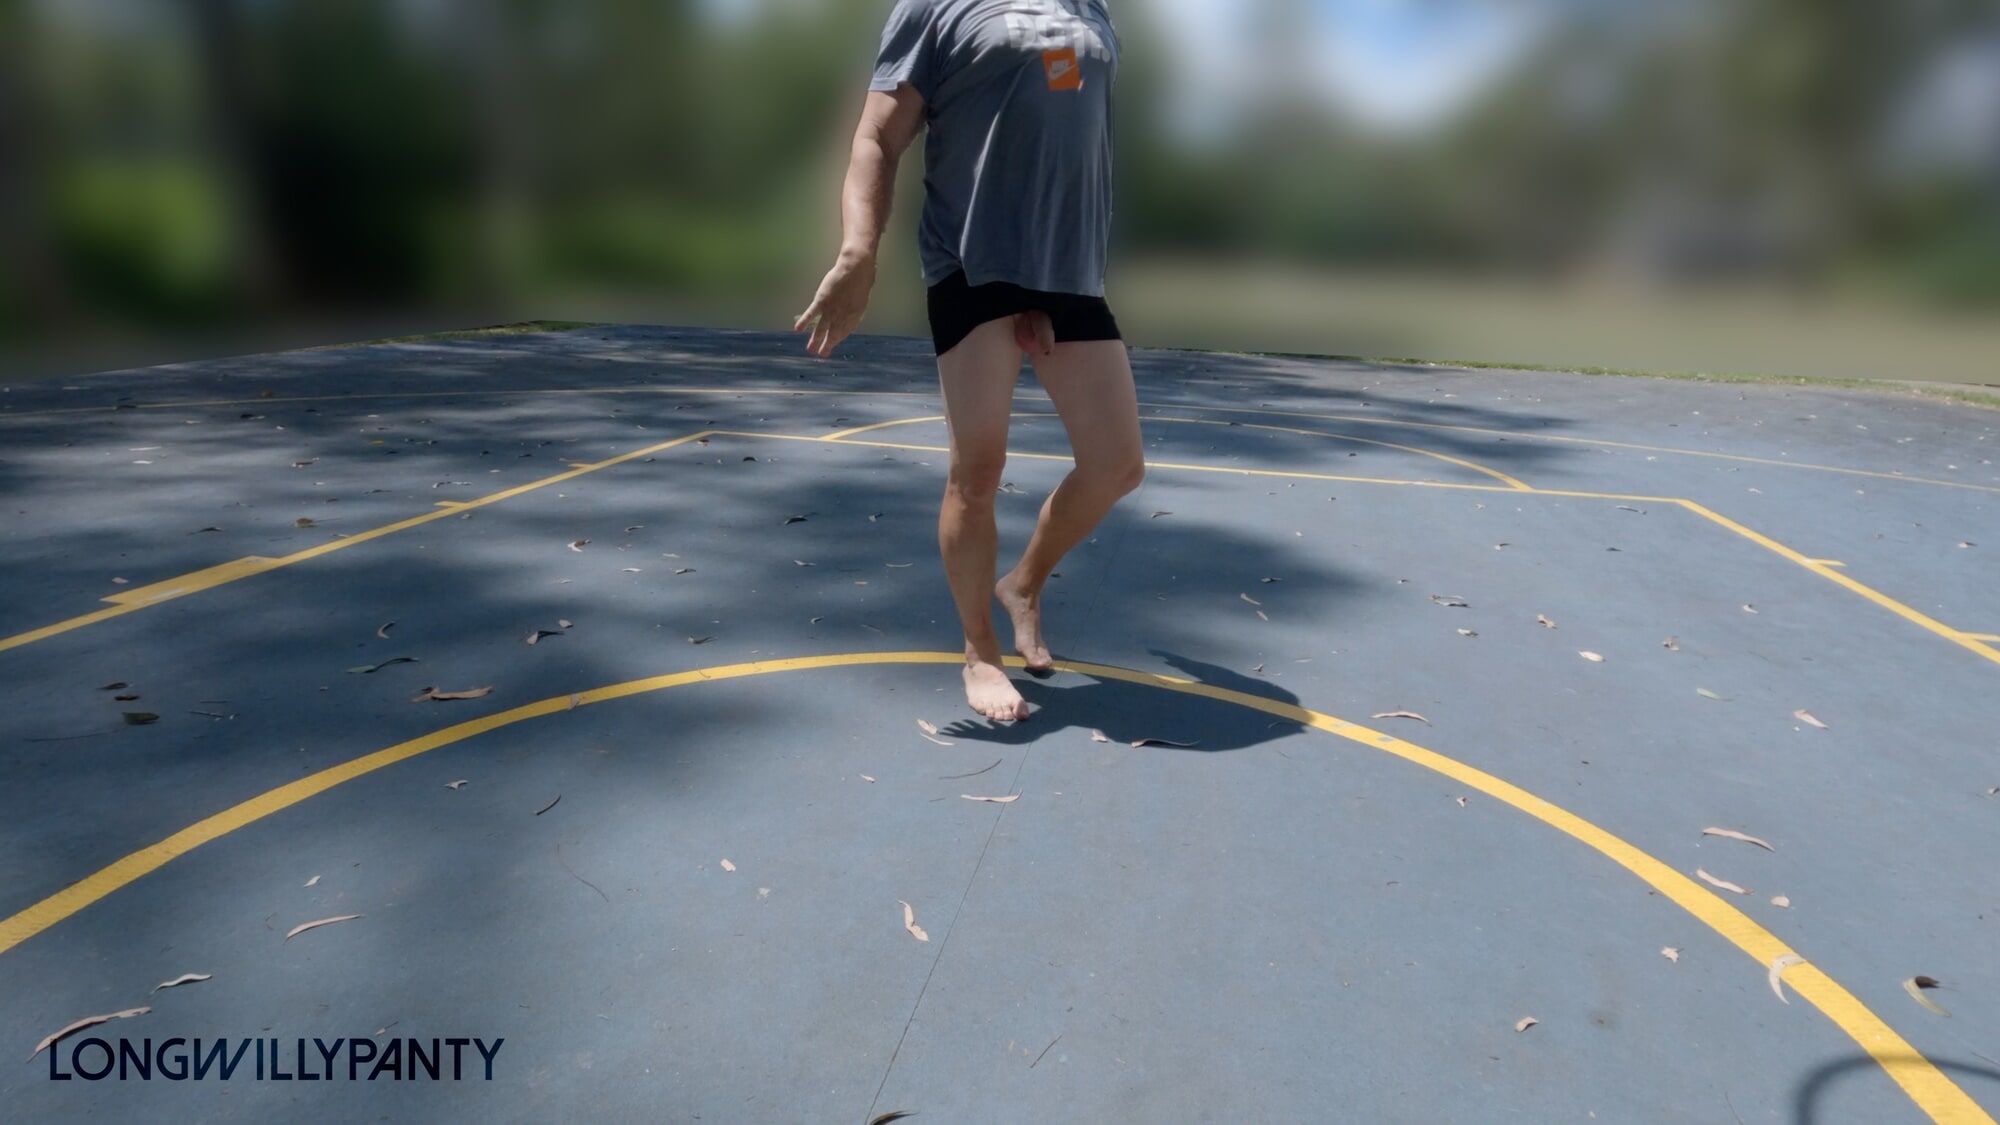 Cock out basketball - new location #9